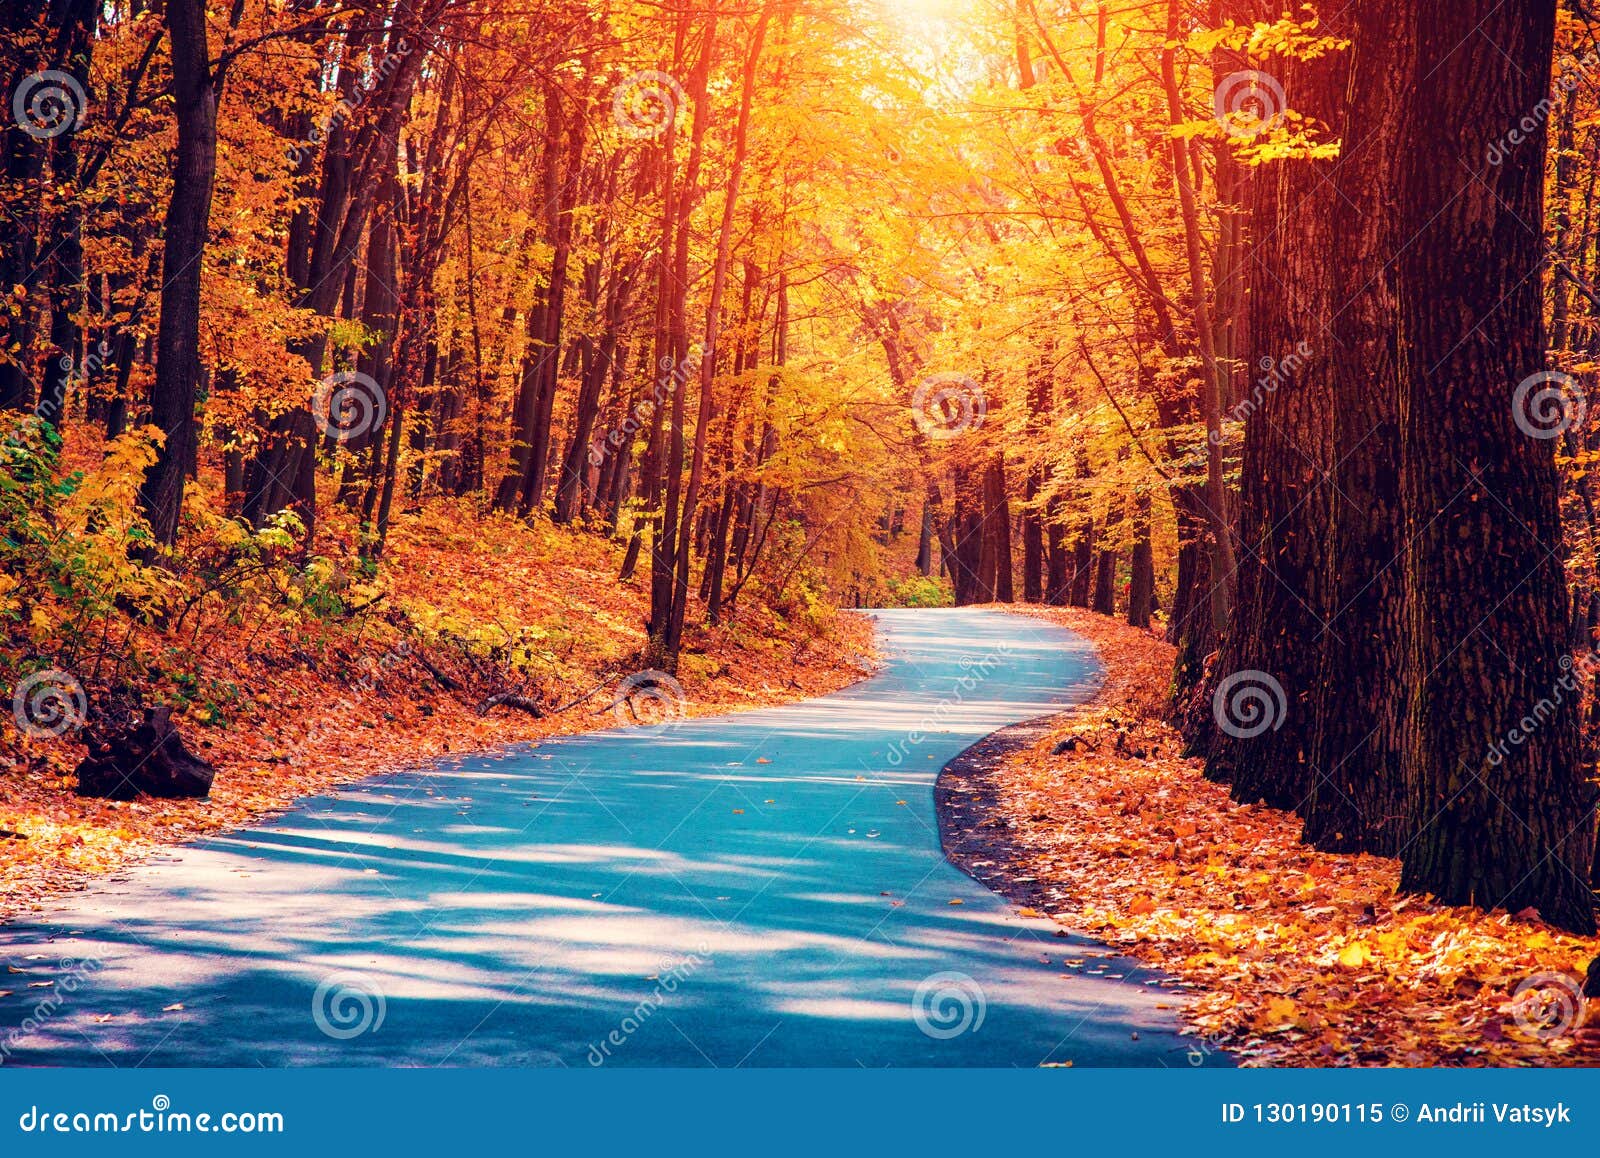 Mystic Charming Enchanting Landscape with a Road in the Autumn F Stock